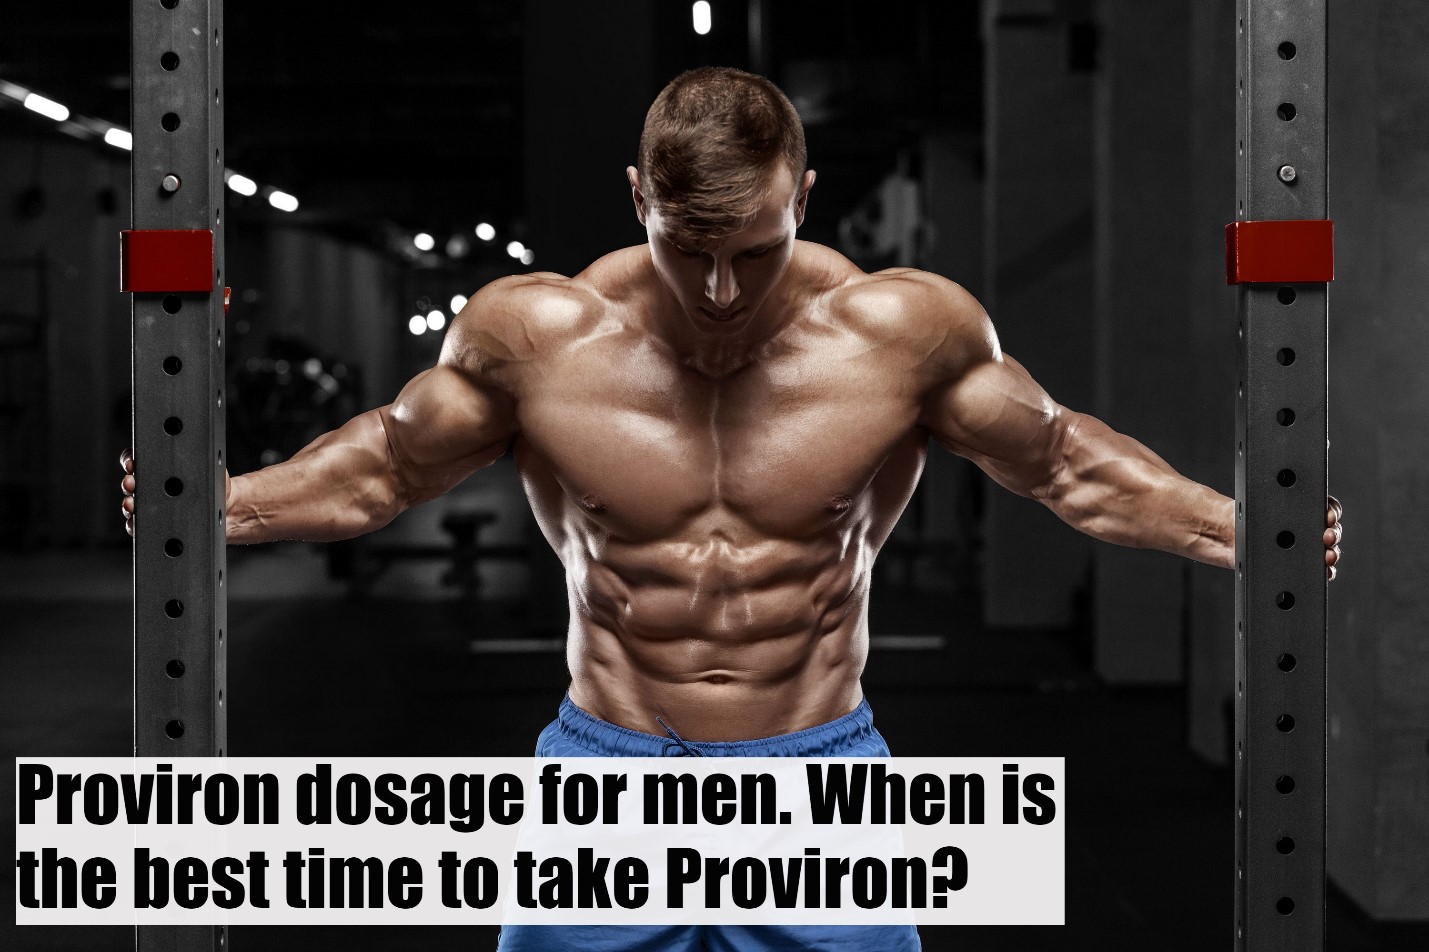 Proviron dosage for men. When is the best time to take Proviron?